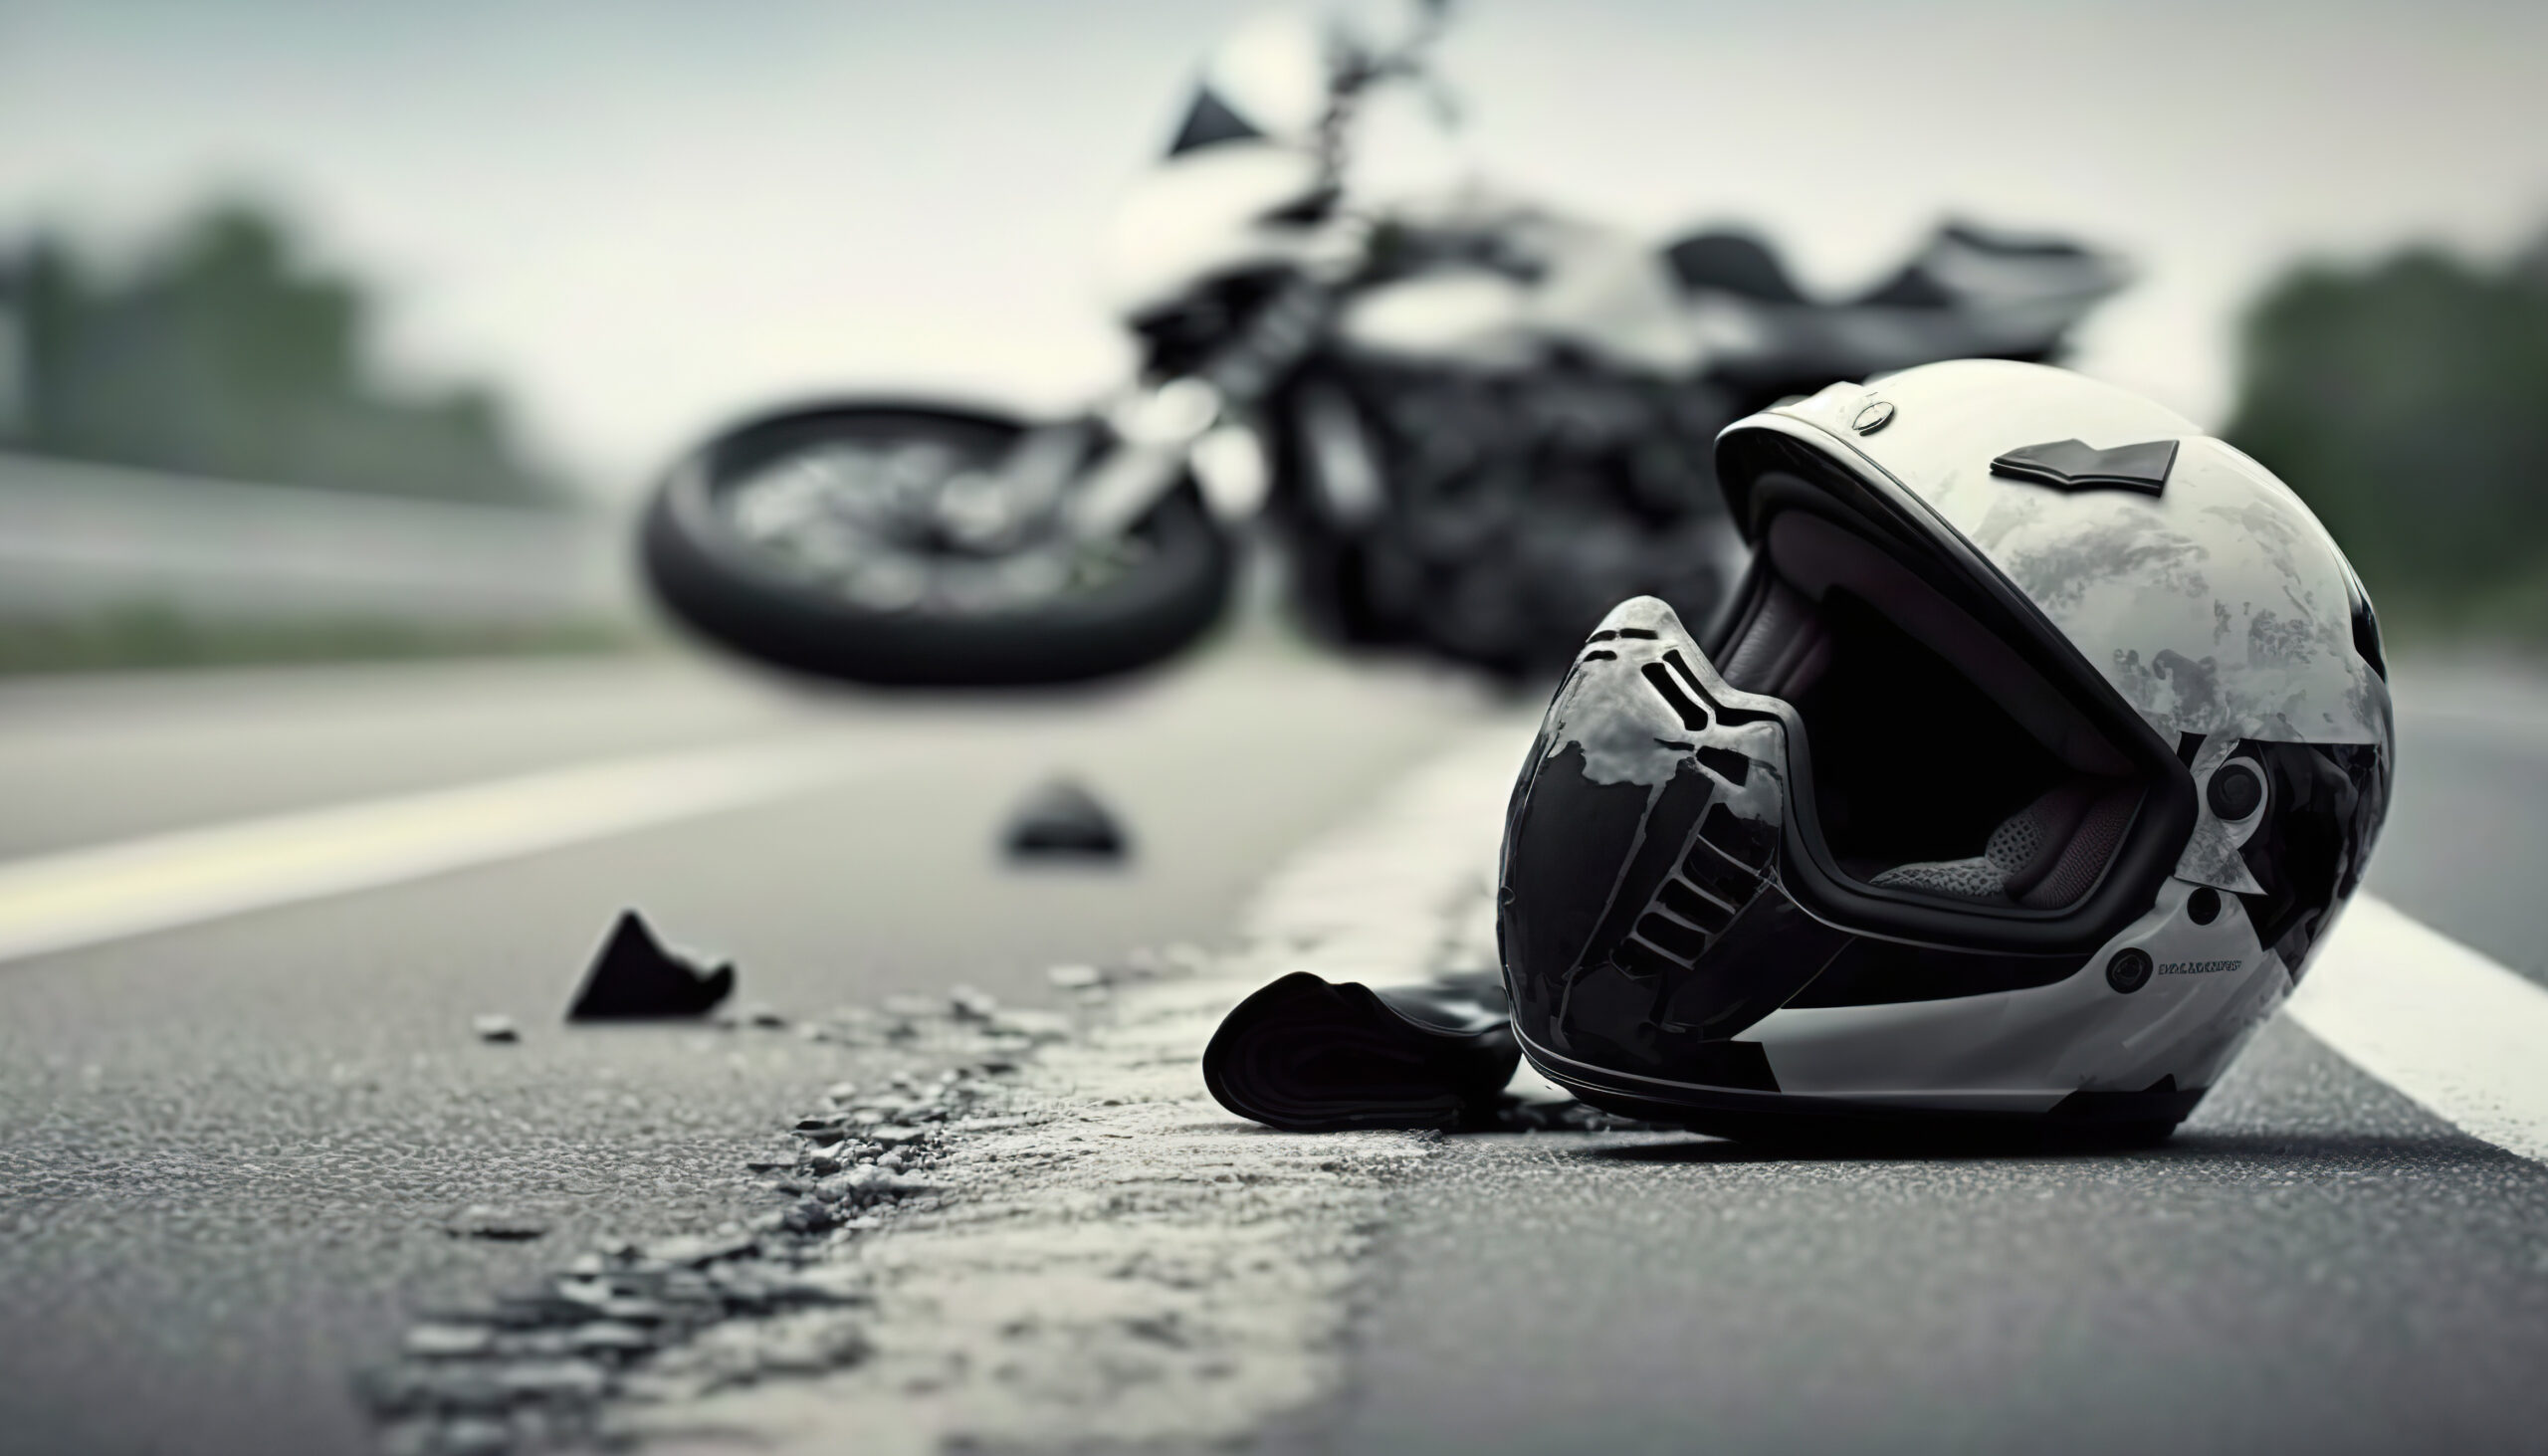 Featured image for “What to Expect After a Motorcycle Accident in Albuquerque”